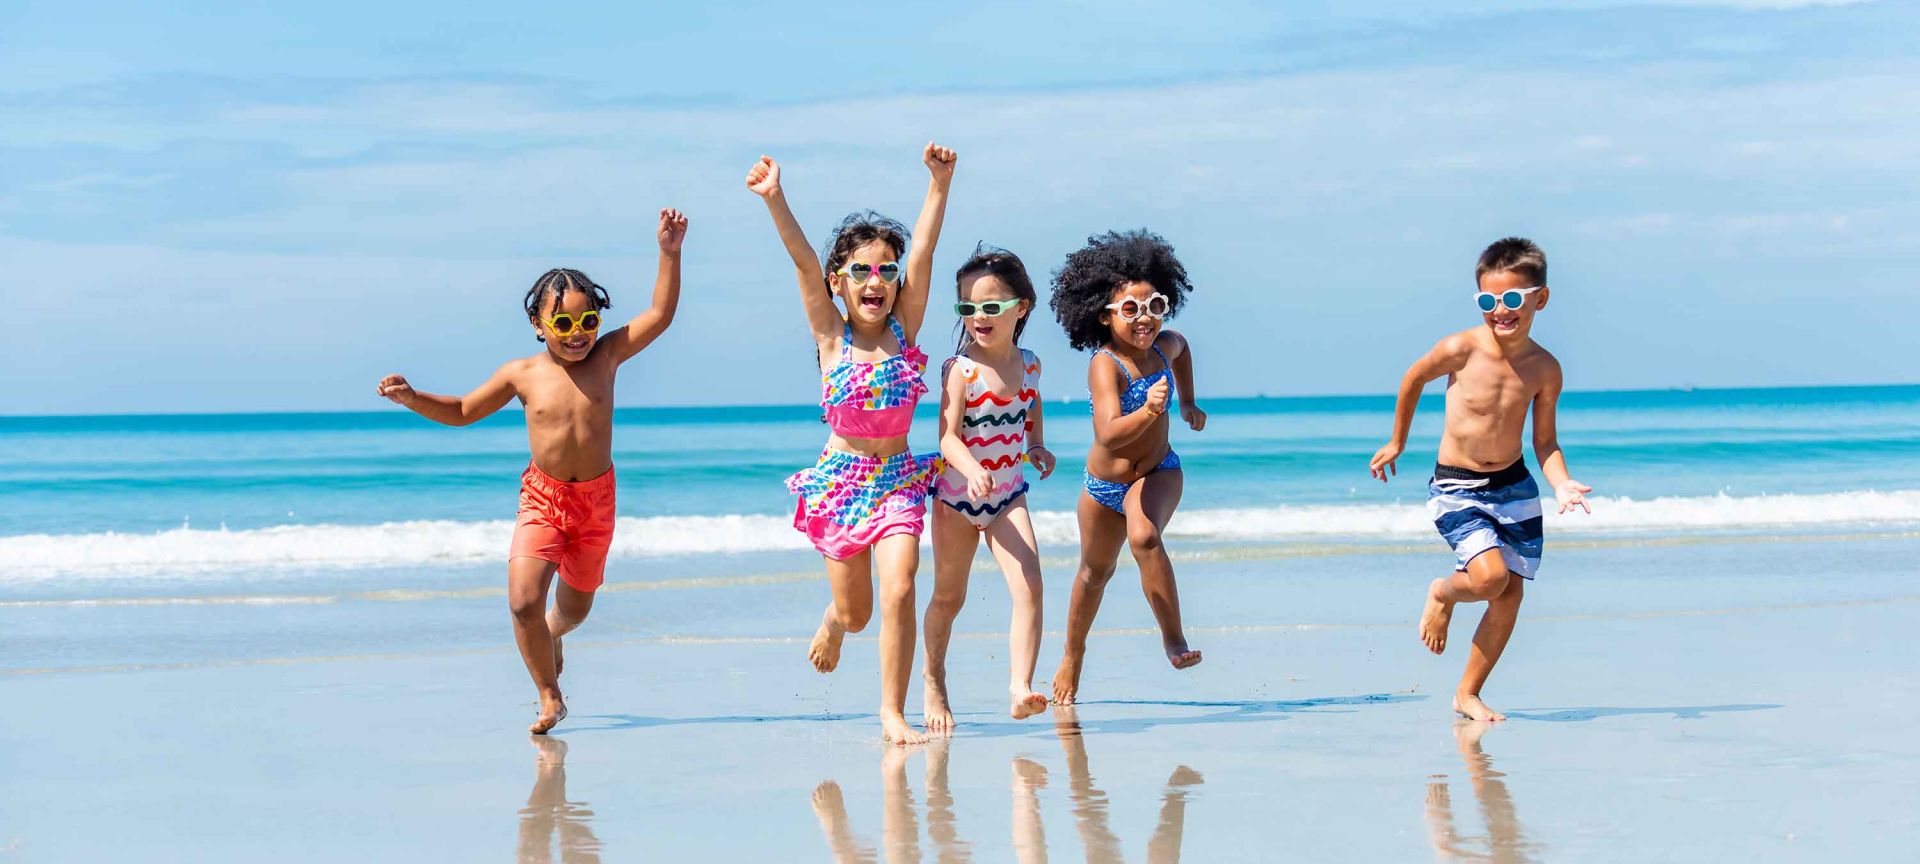 A Group Of Kids Jumping On A Beach